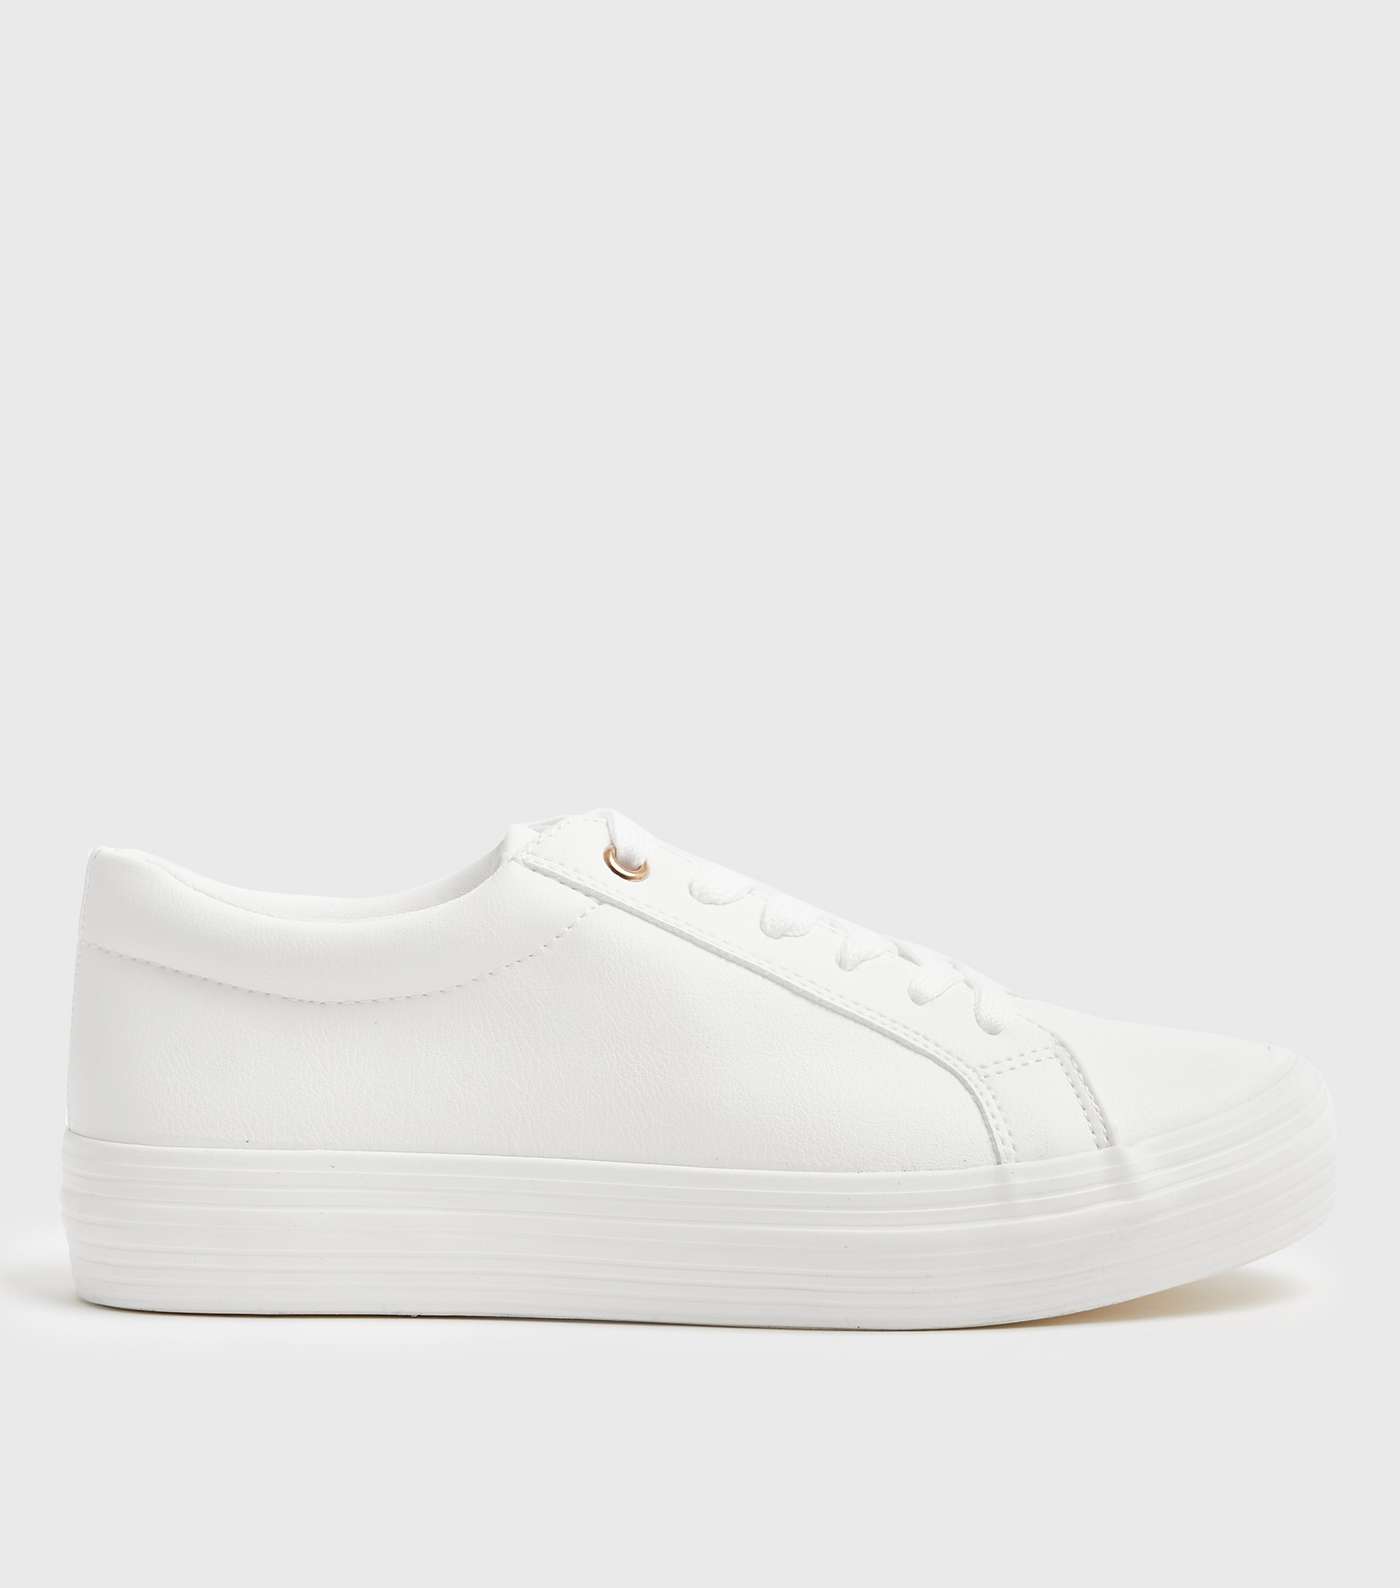 White Leather-Look Lace Up Flatform Trainers